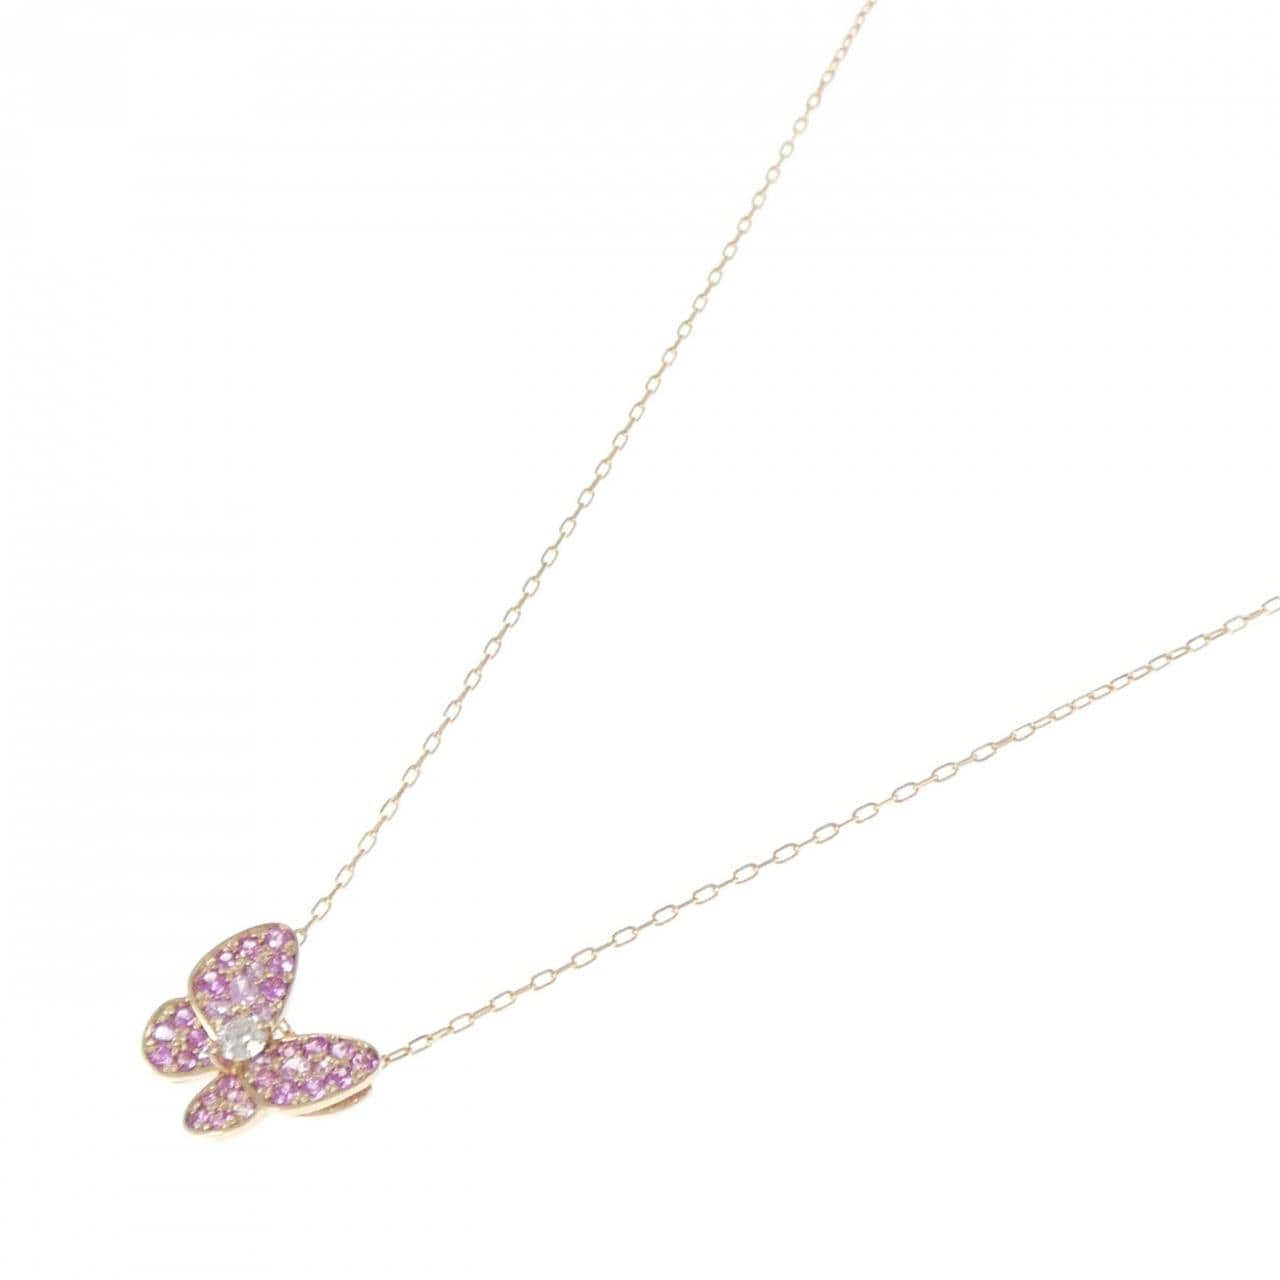 K18PG butterfly sapphire necklace 0.53CT